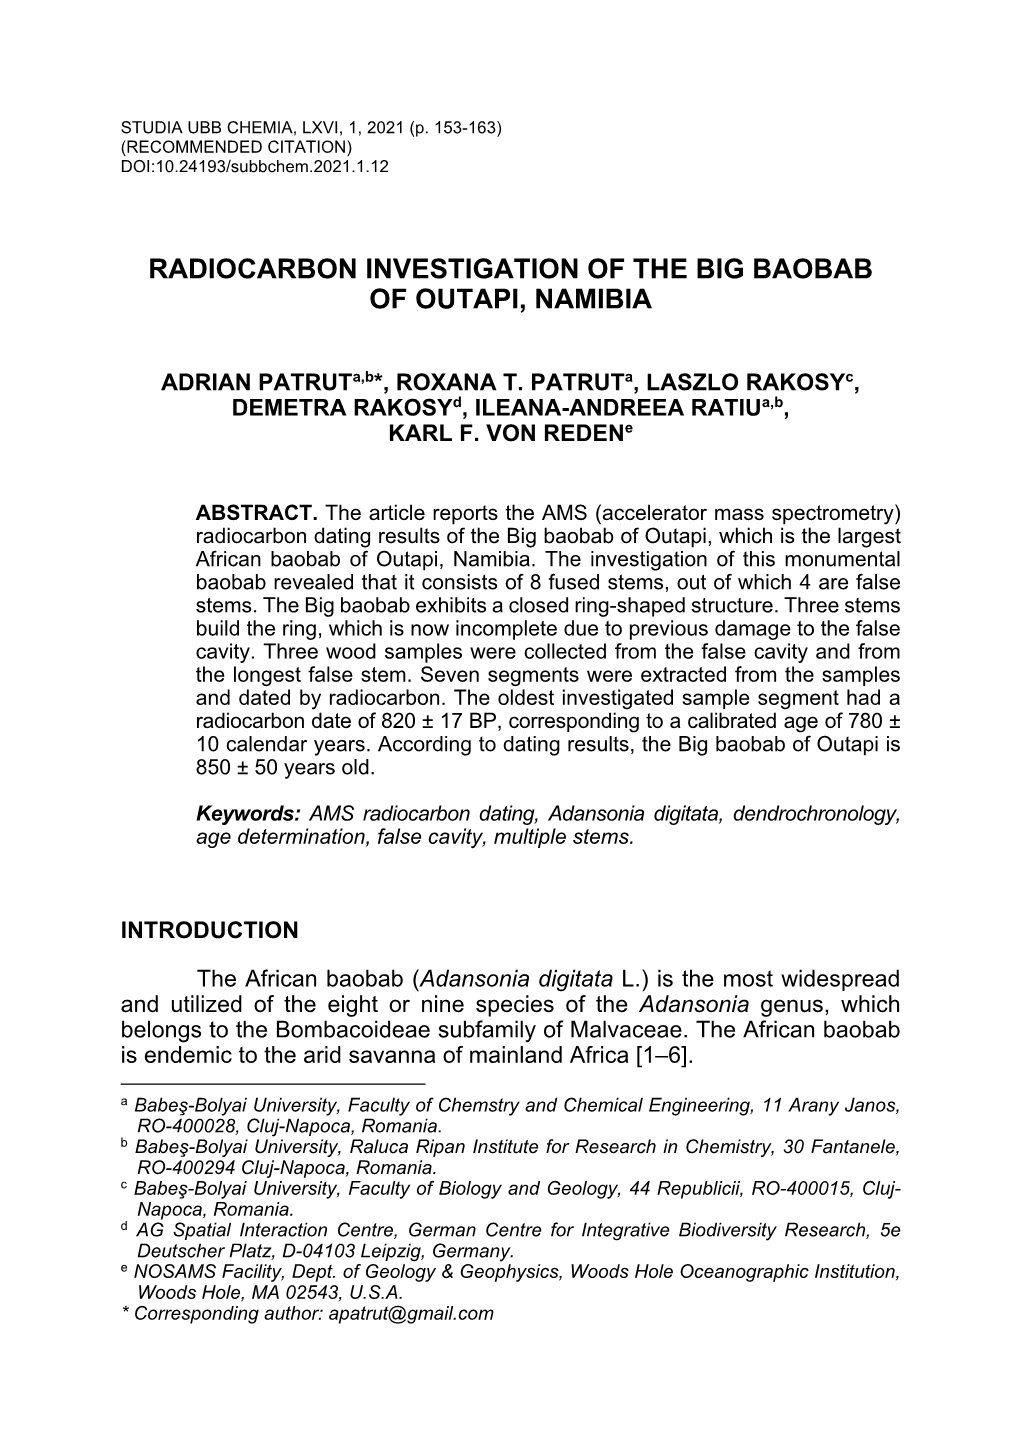 Radiocarbon Investigation of the Big Baobab of Outapi, Namibia